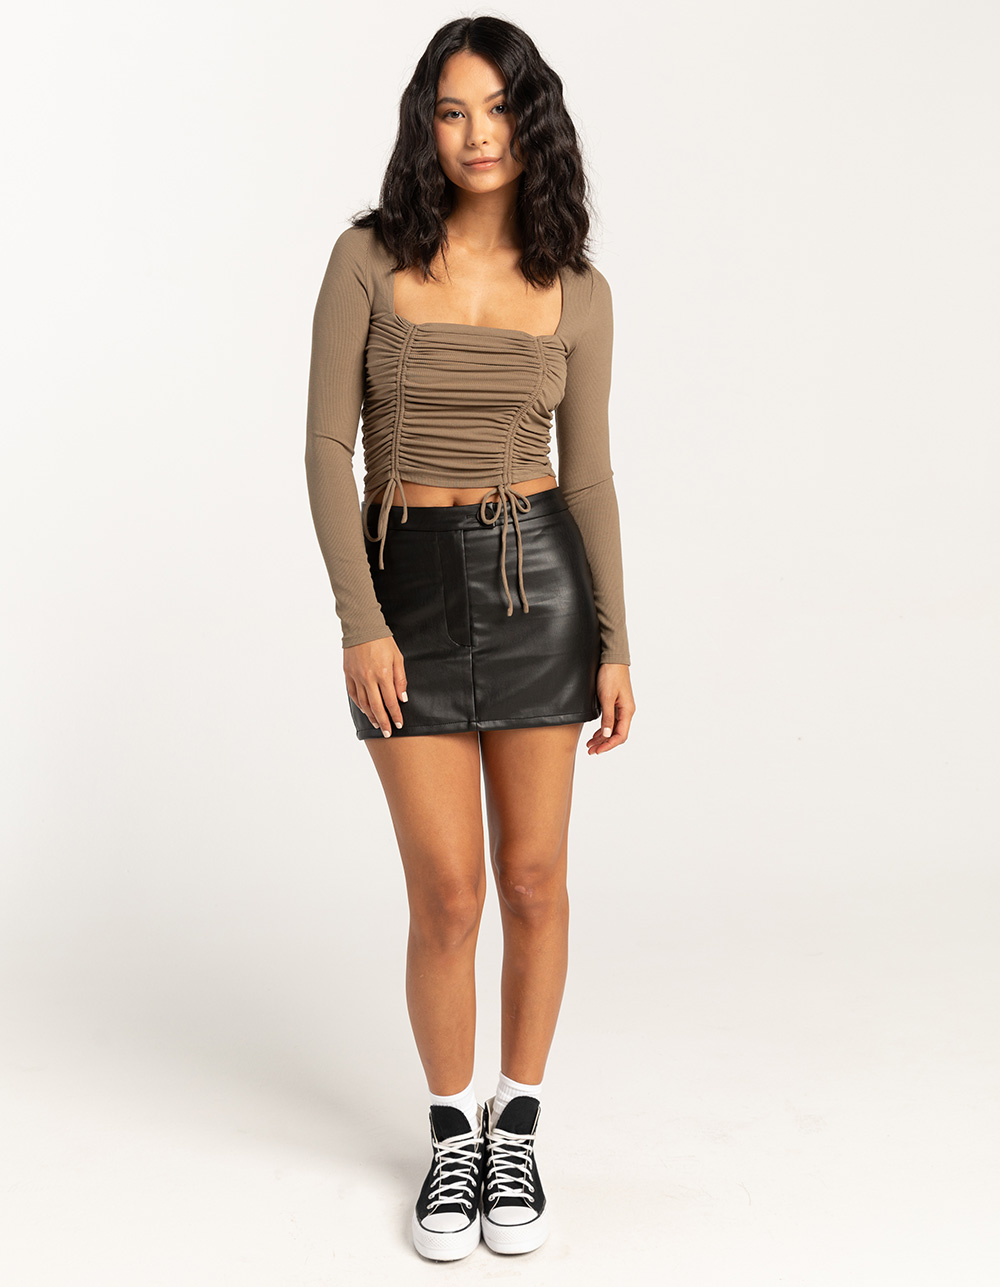 WEST OF MELROSE Faux Leather Womens Mini Skirt - BLACK | Tillys